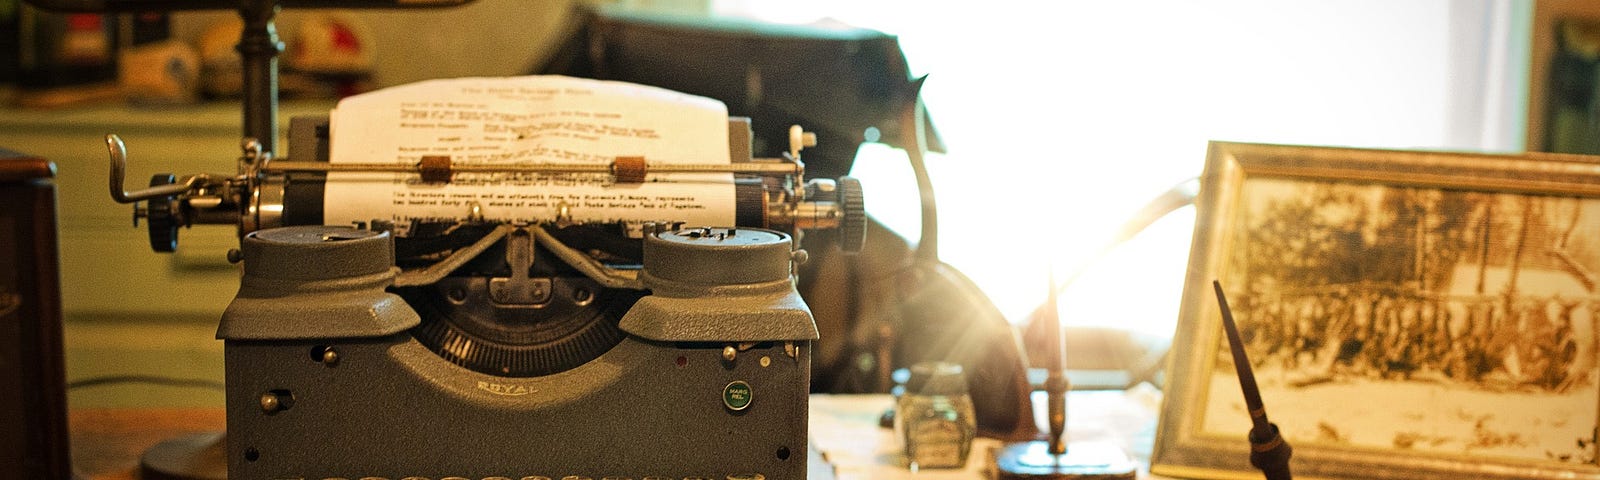 Antique typewriter as example of tools we use in writing